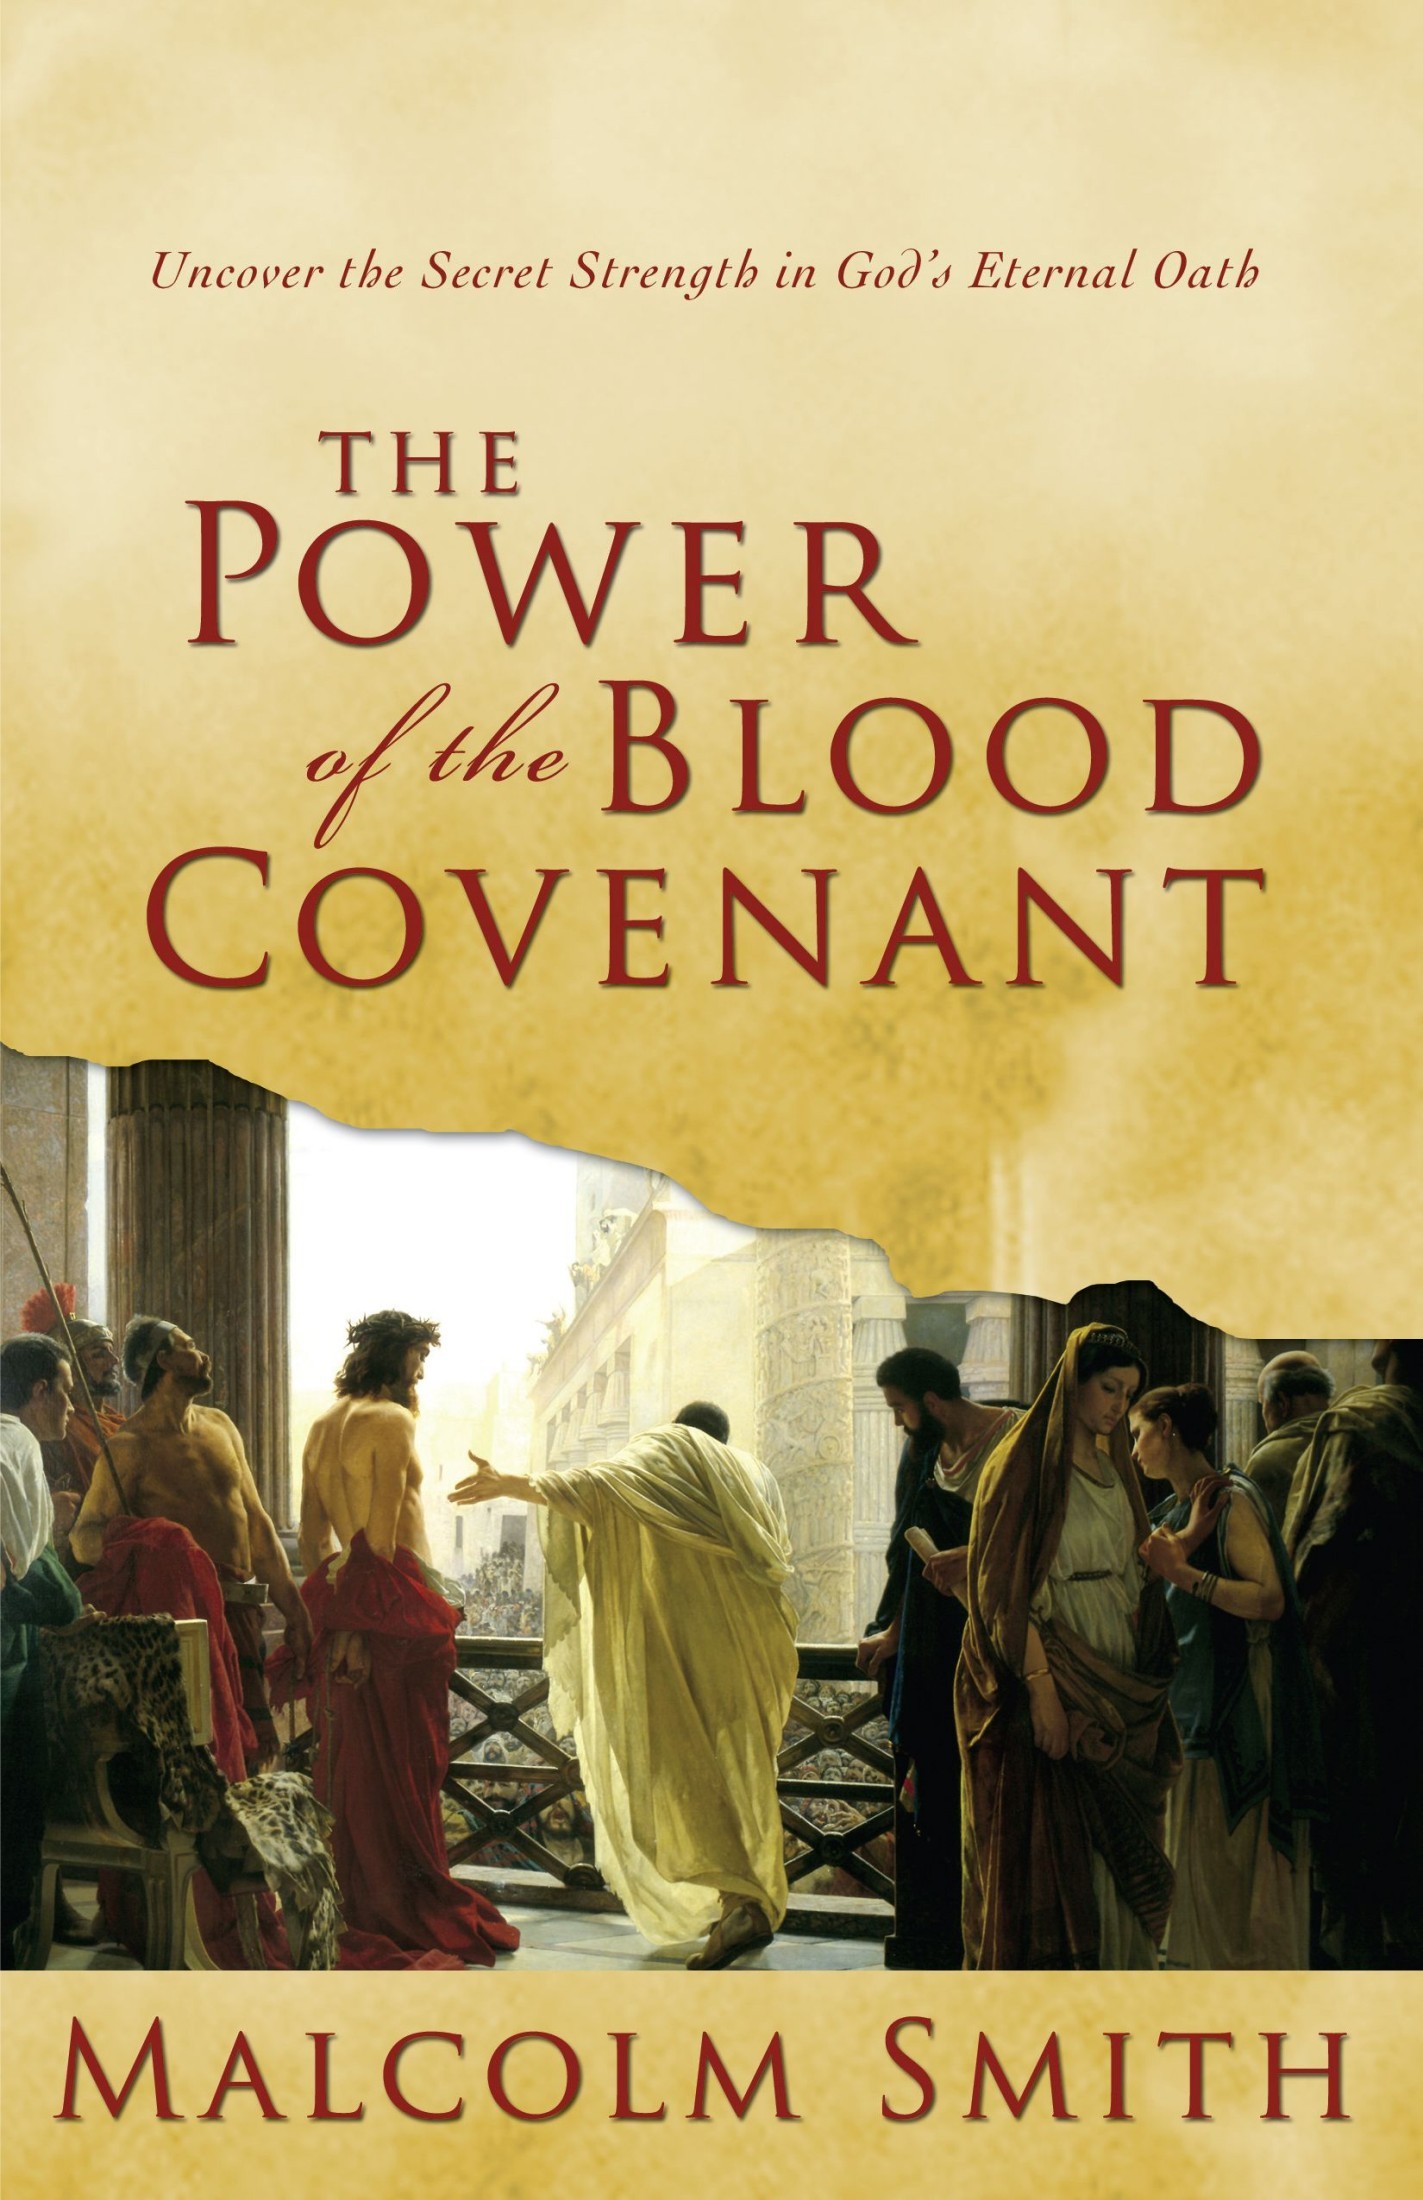 The Power of the Blood Covenant: Uncover the Secret Strength of God's Eternal Oath